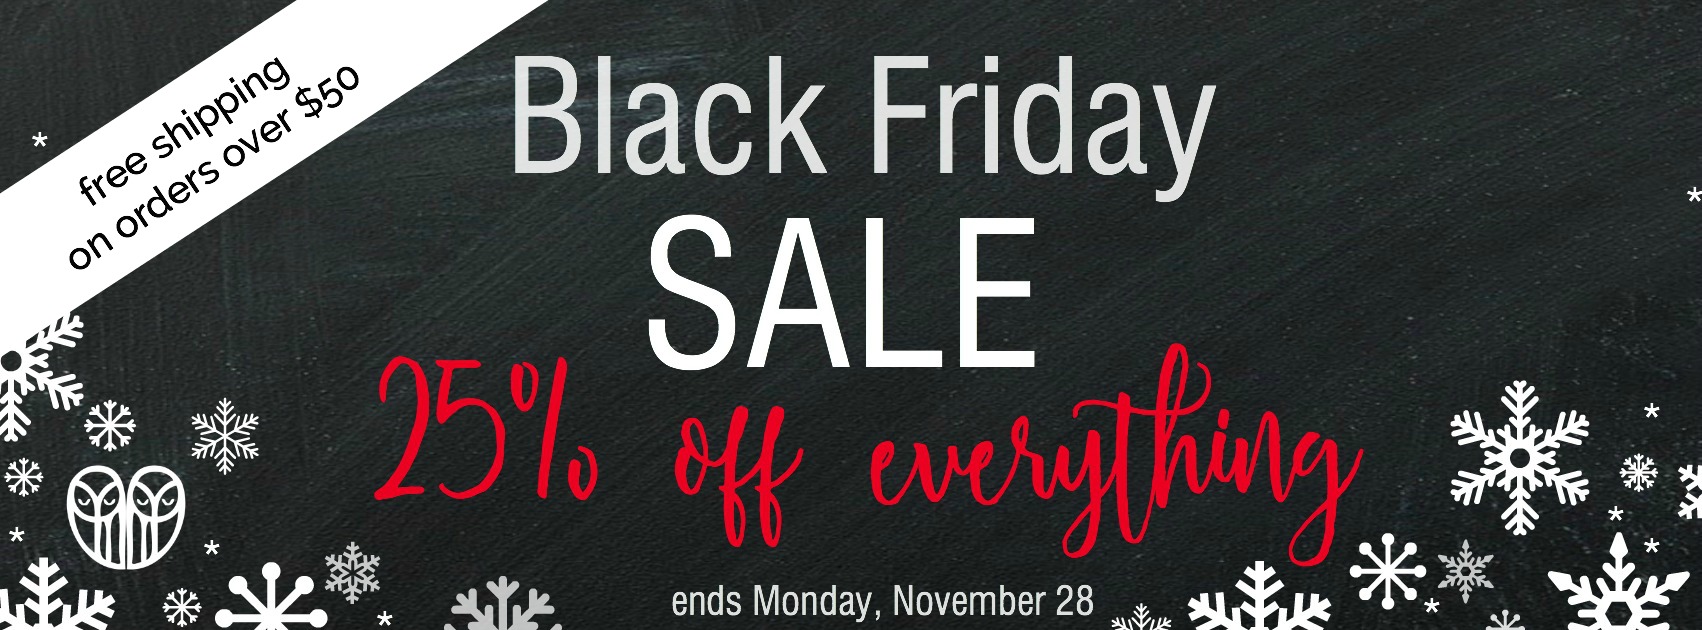 Black Friday Sale: 25% Off Everything Plus Free Shipping - mediakits.theygsgroup.com